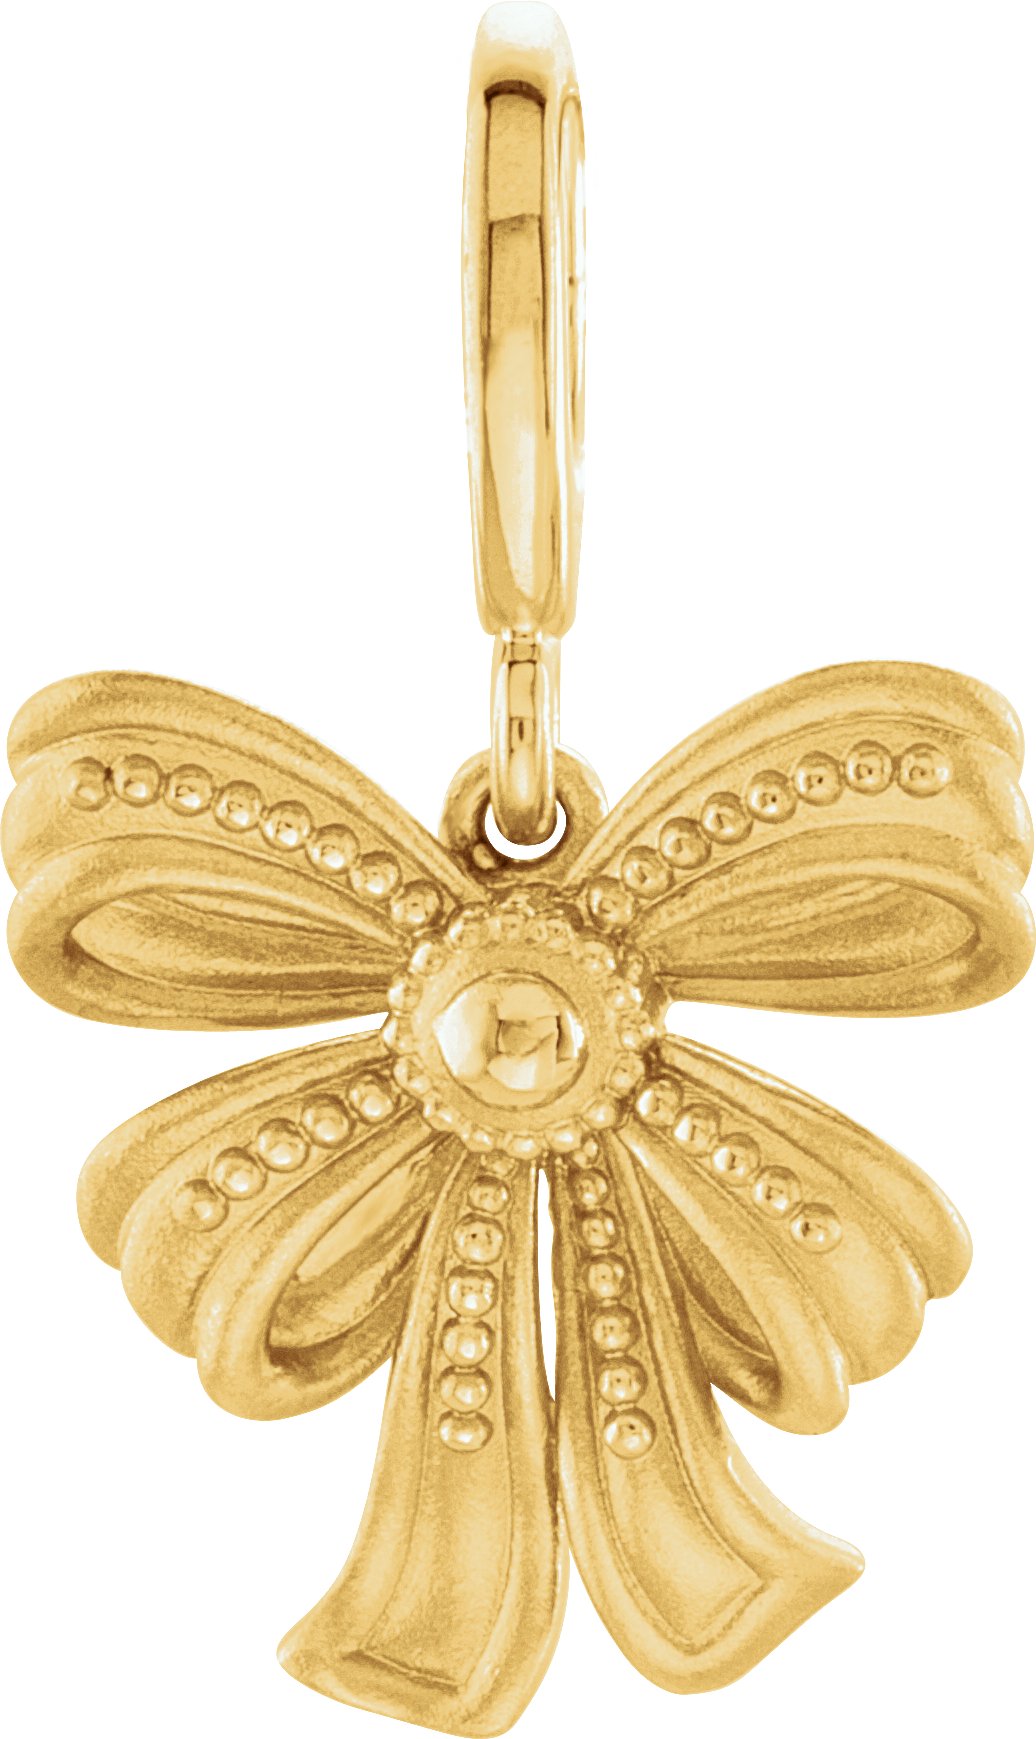 14K Yellow Vintage-Inspired Bow Charm